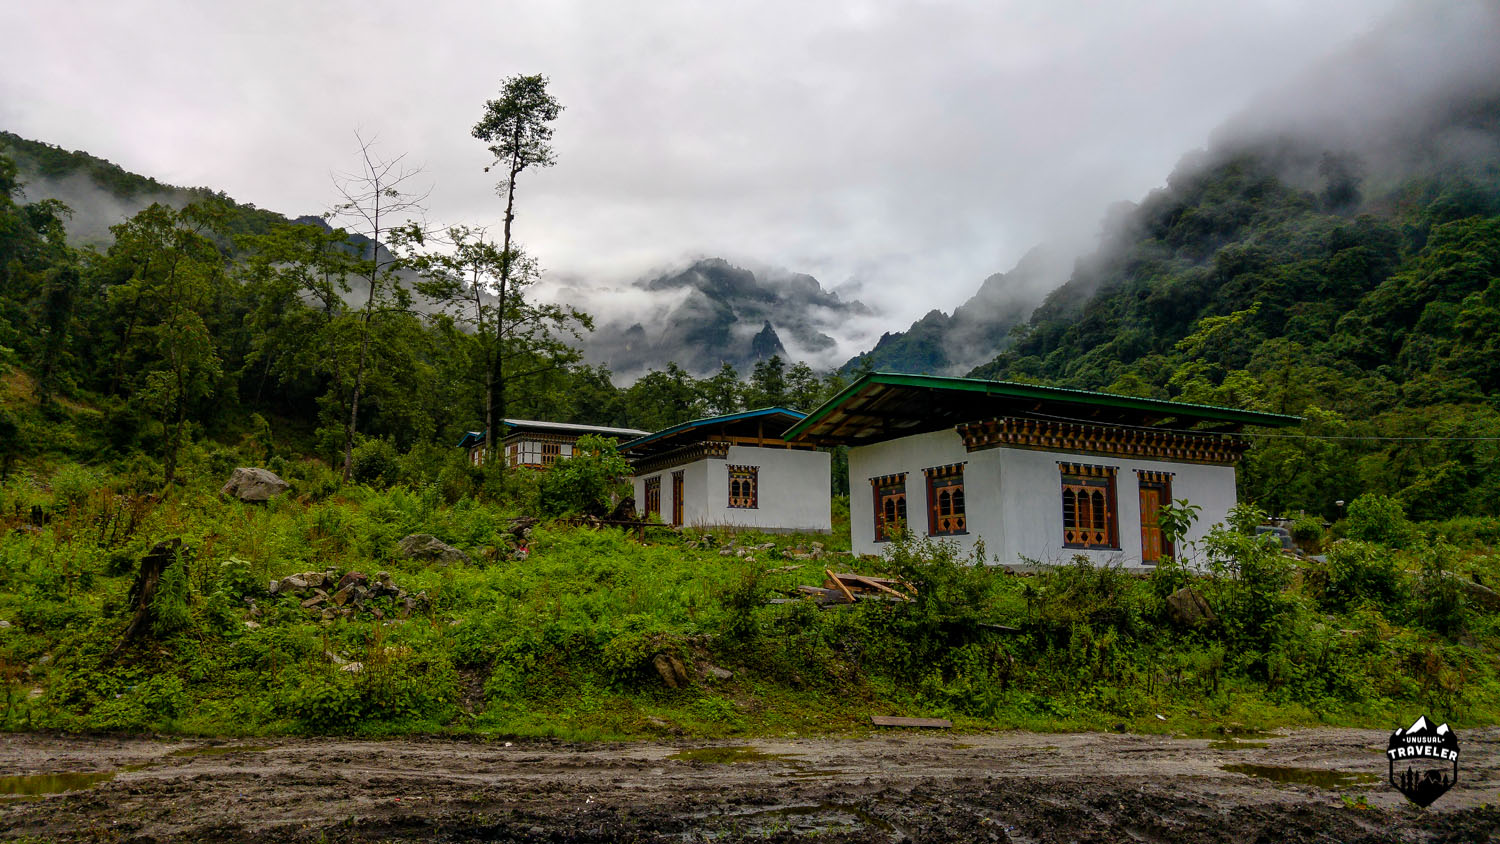 Gasa accomandation, the only one in the area in northern Bhutan.